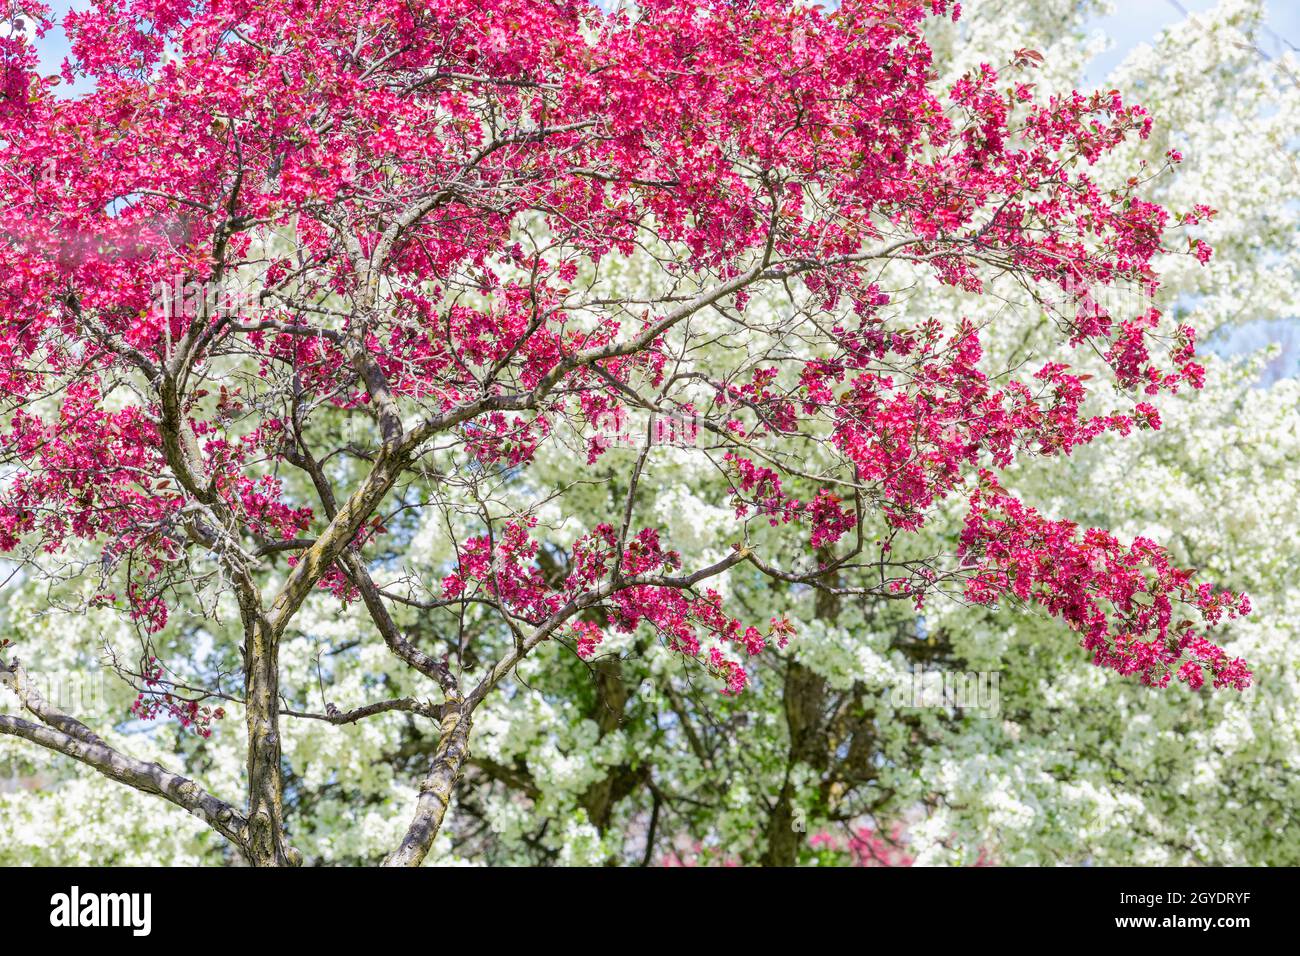 Flowering crabapple tree, Spring, E USA, by Dominique Braud/Dembinsky Photo Assoc Stock Photo